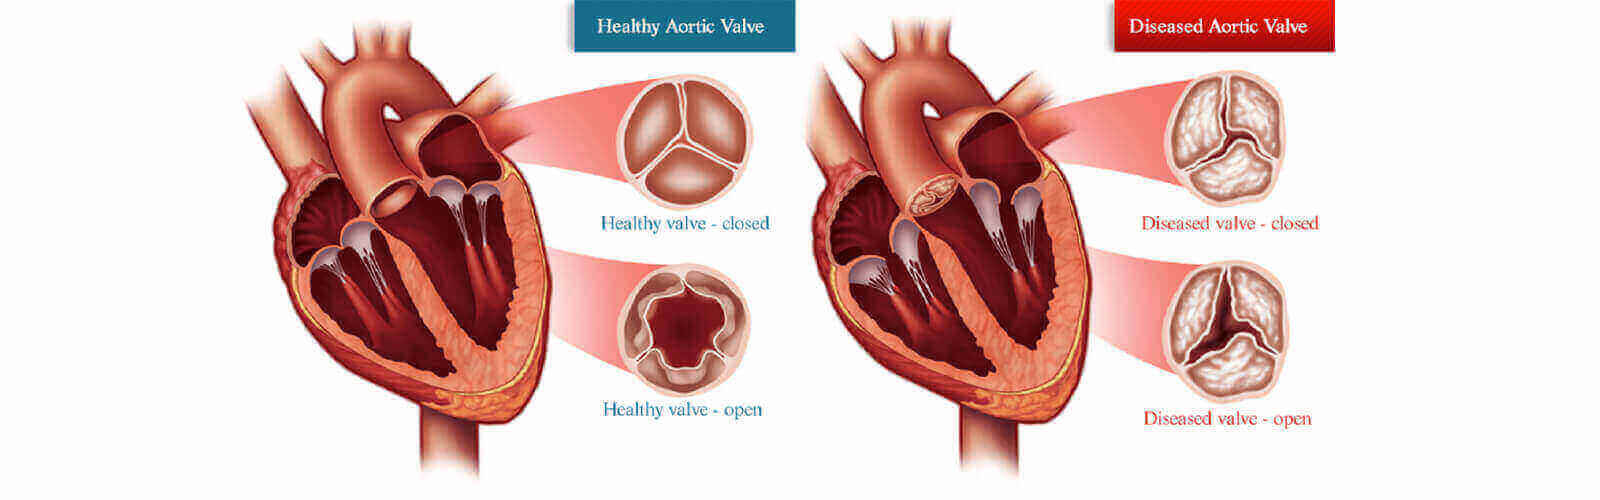 Heart Valve Replacement Surgery in Middle East